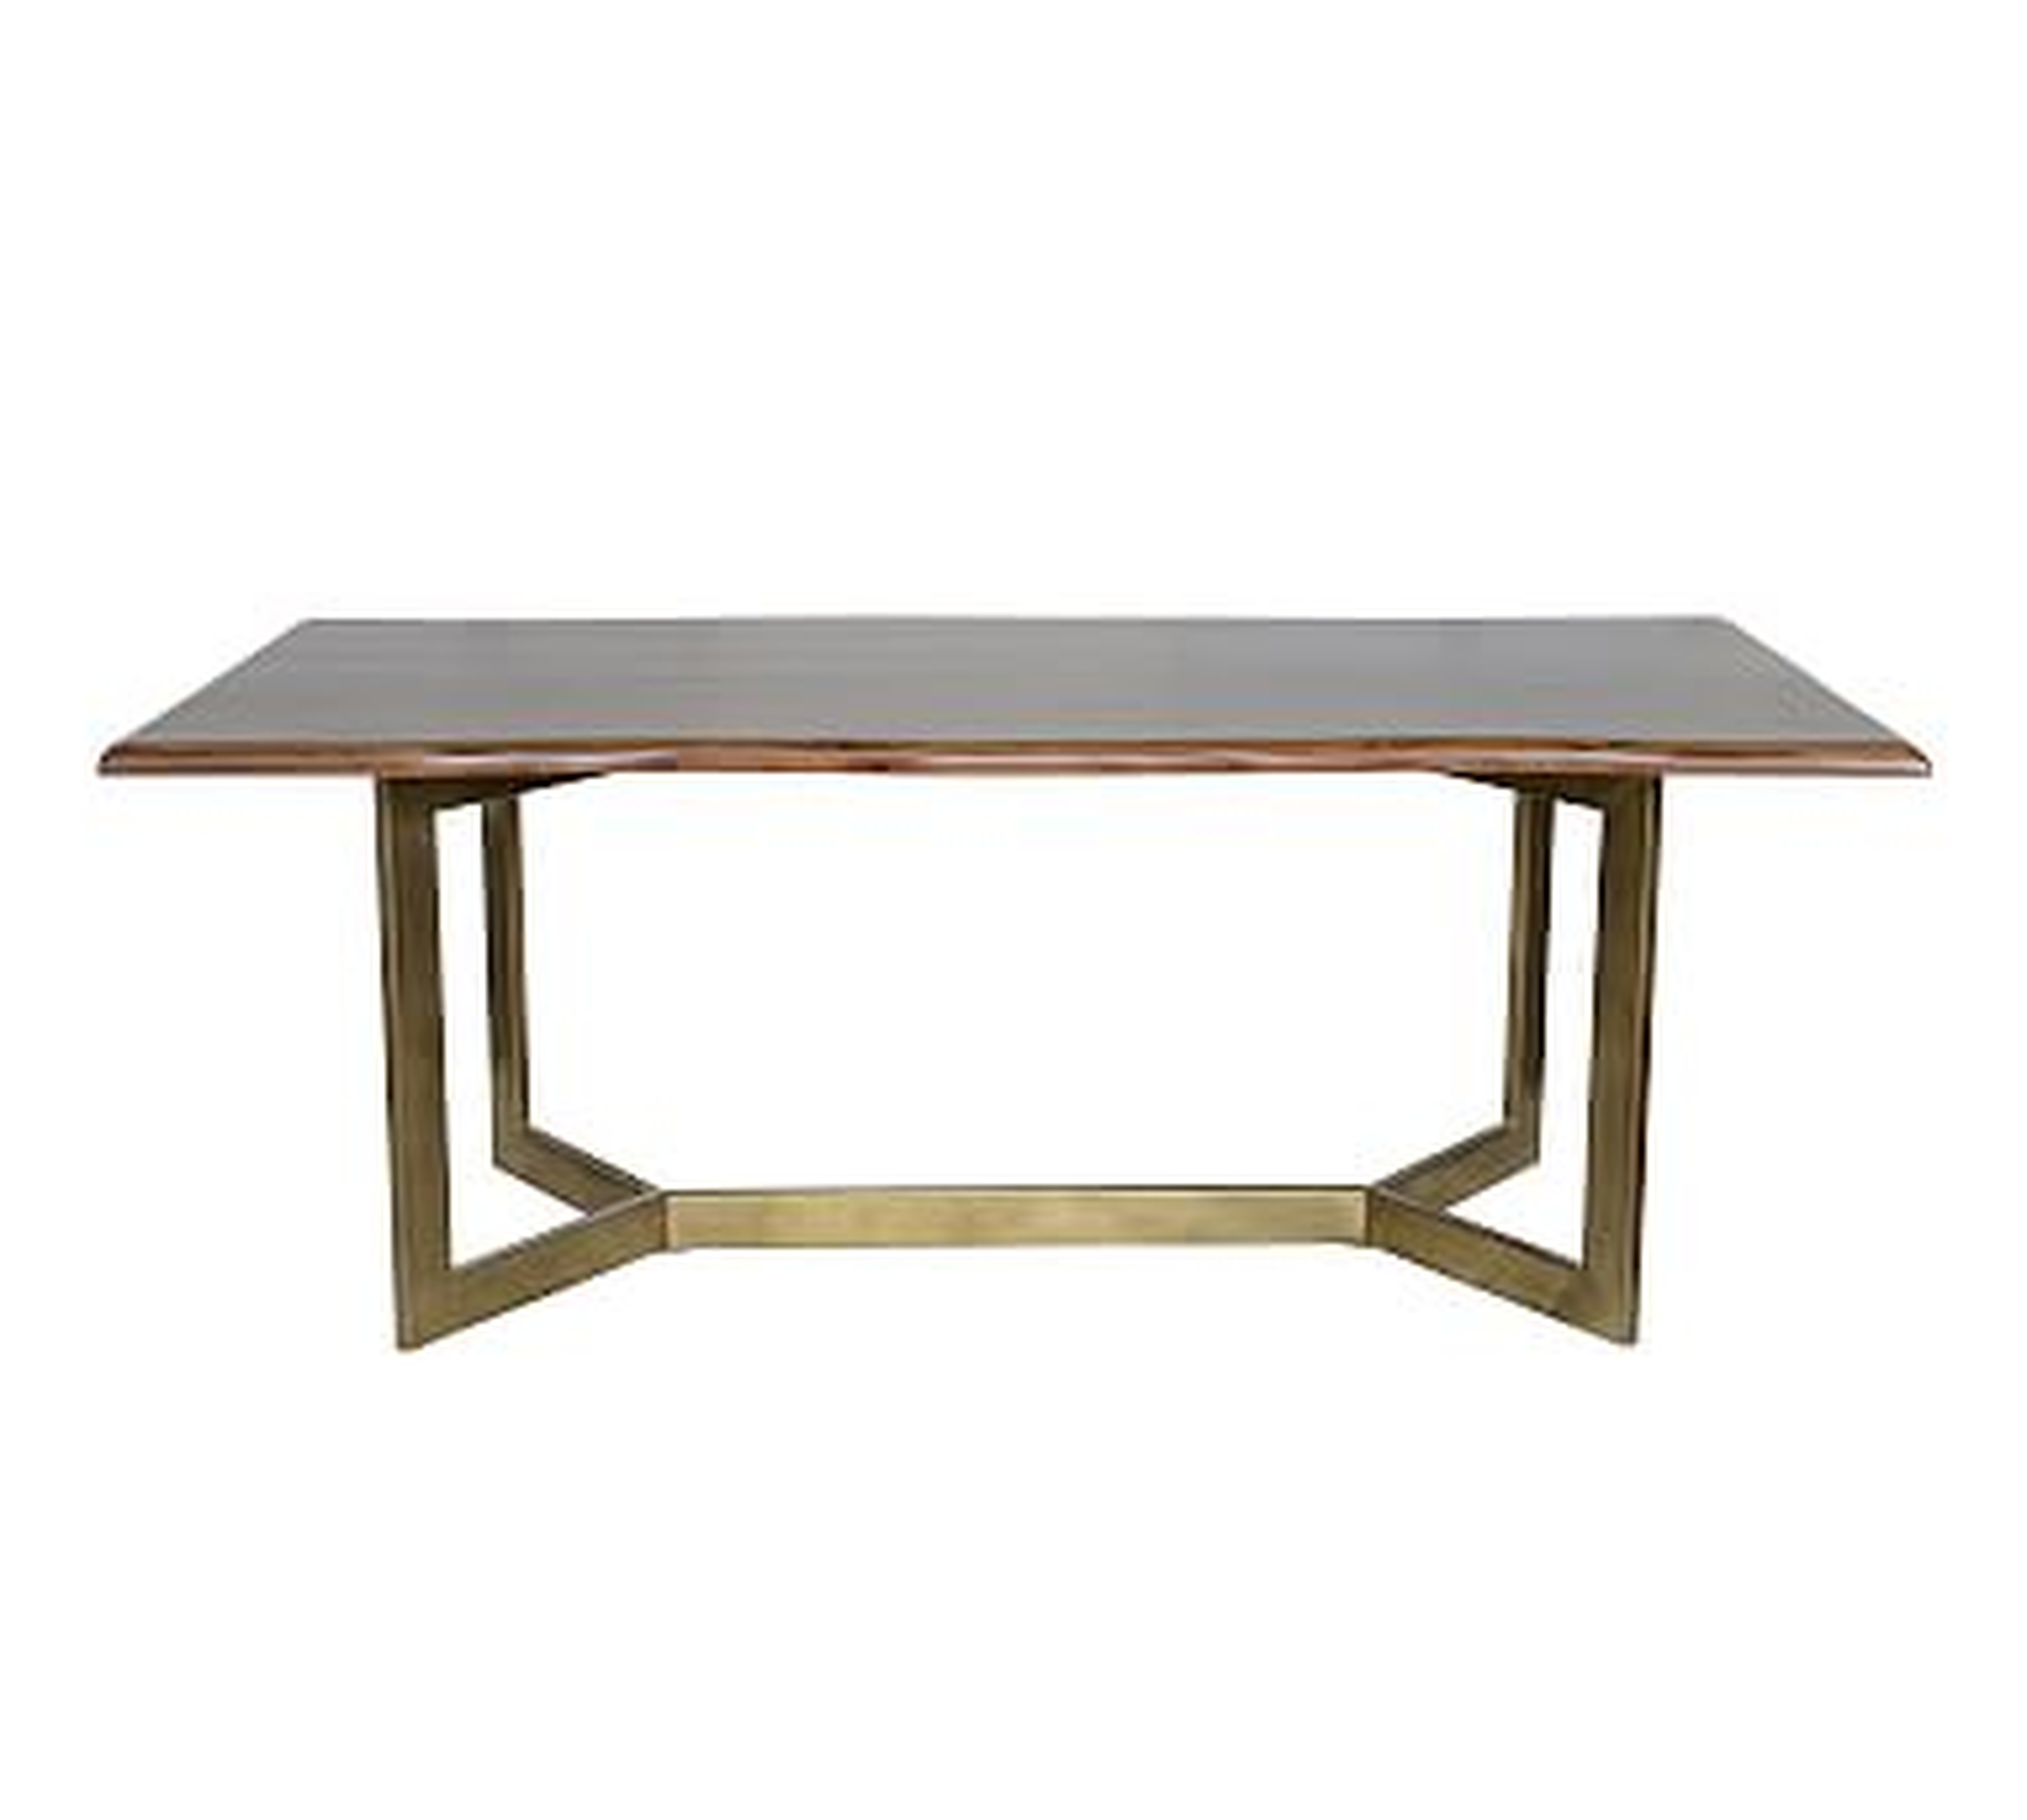 Avondale Dining Table, Antique Brass/Wood, 80" L x 40" W - Pottery Barn